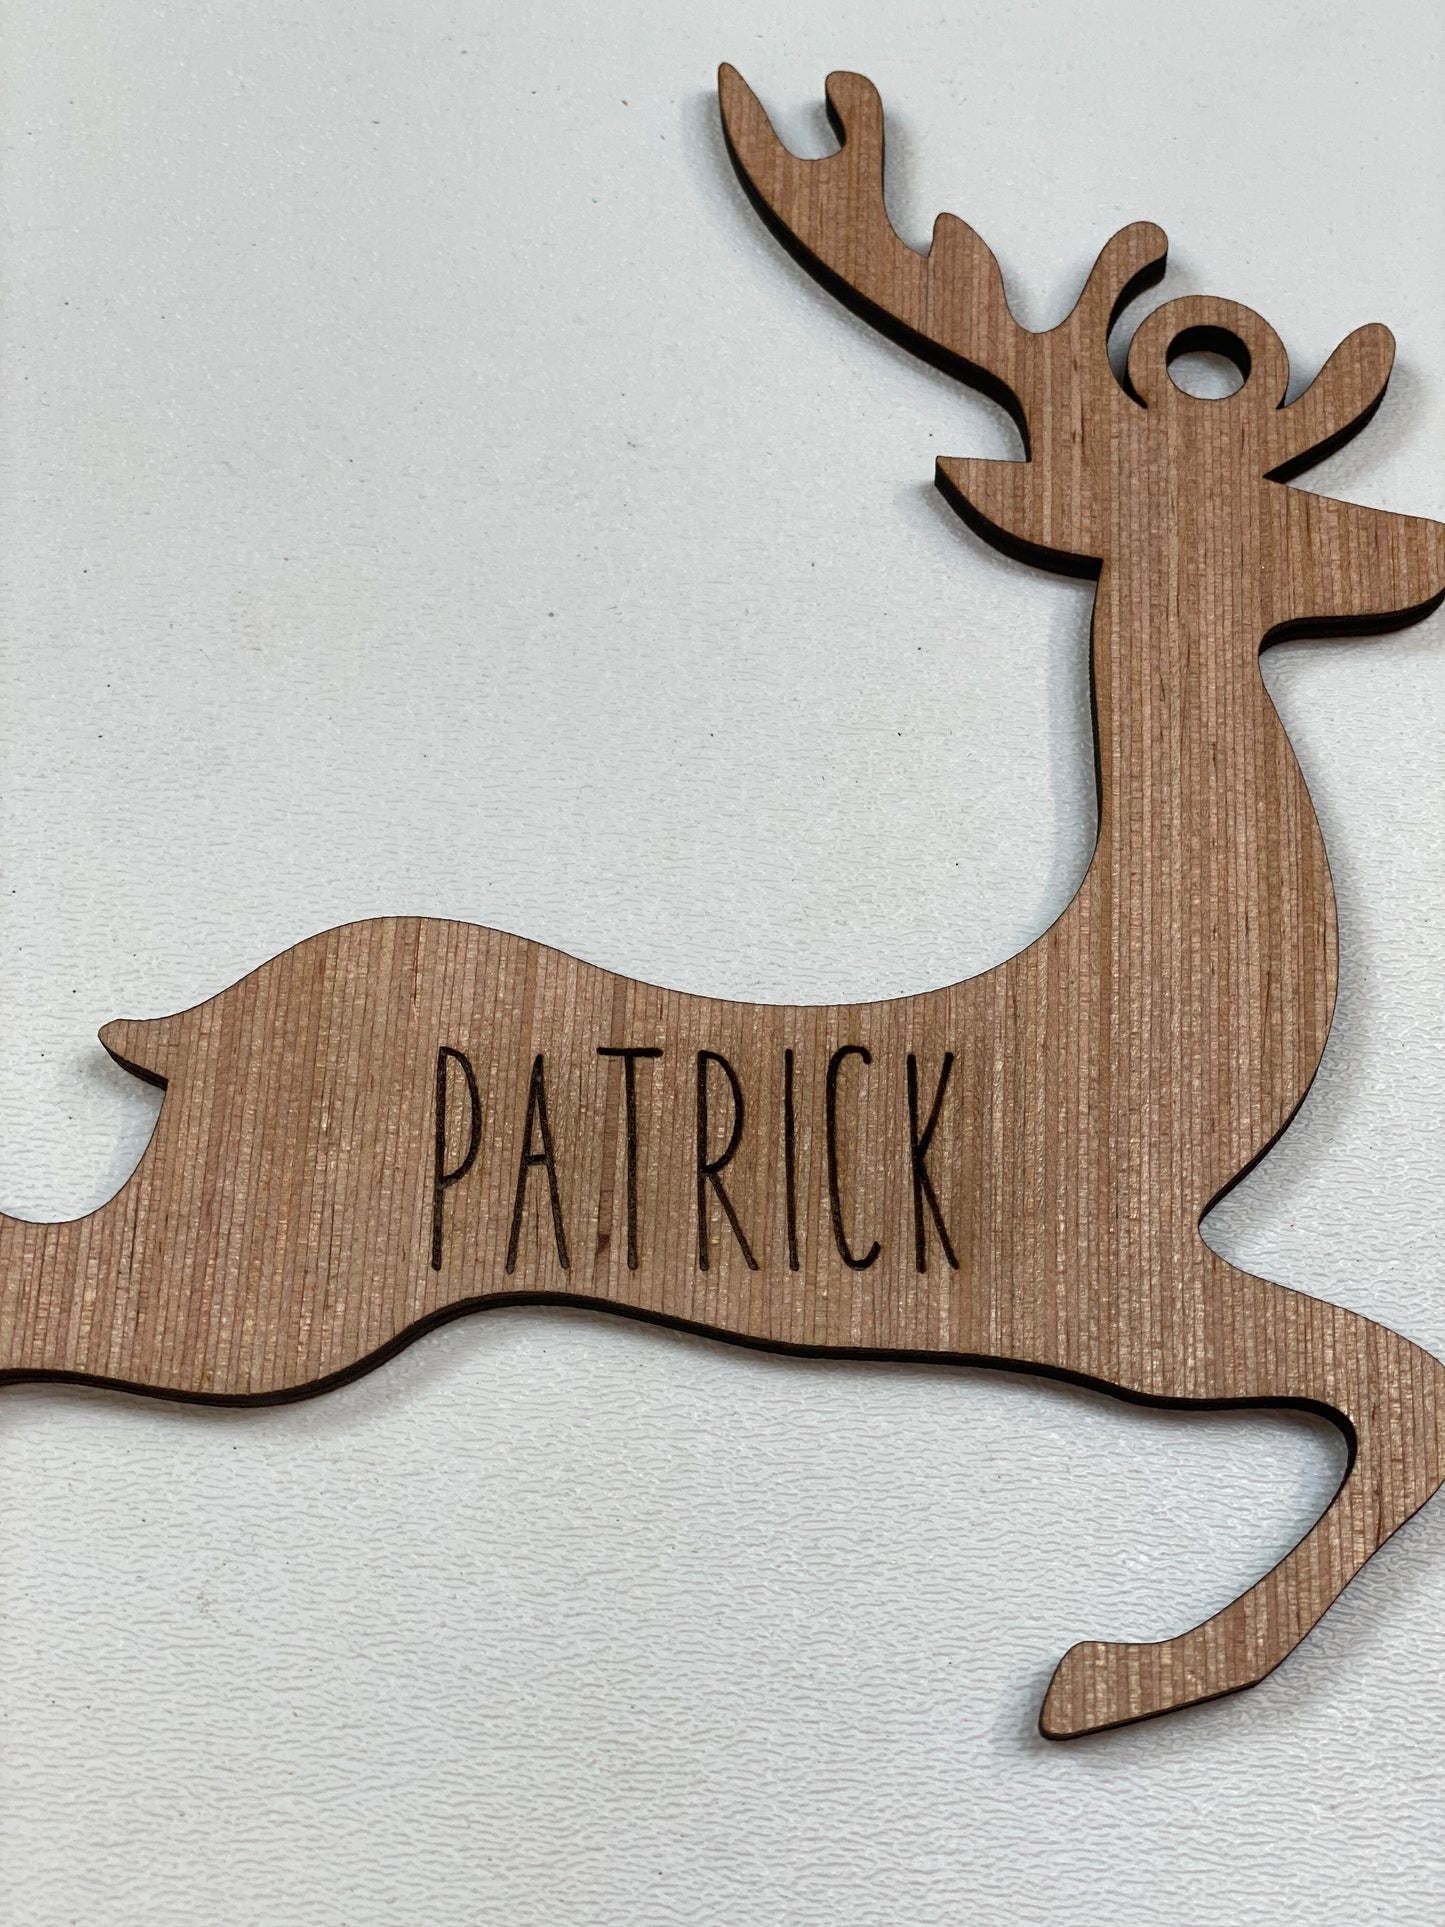 Personalized Reindeer Stocking Tags / Gift Tags / Christmas Ornaments  Laser Cut / Engraved Wooden Blank Ornament